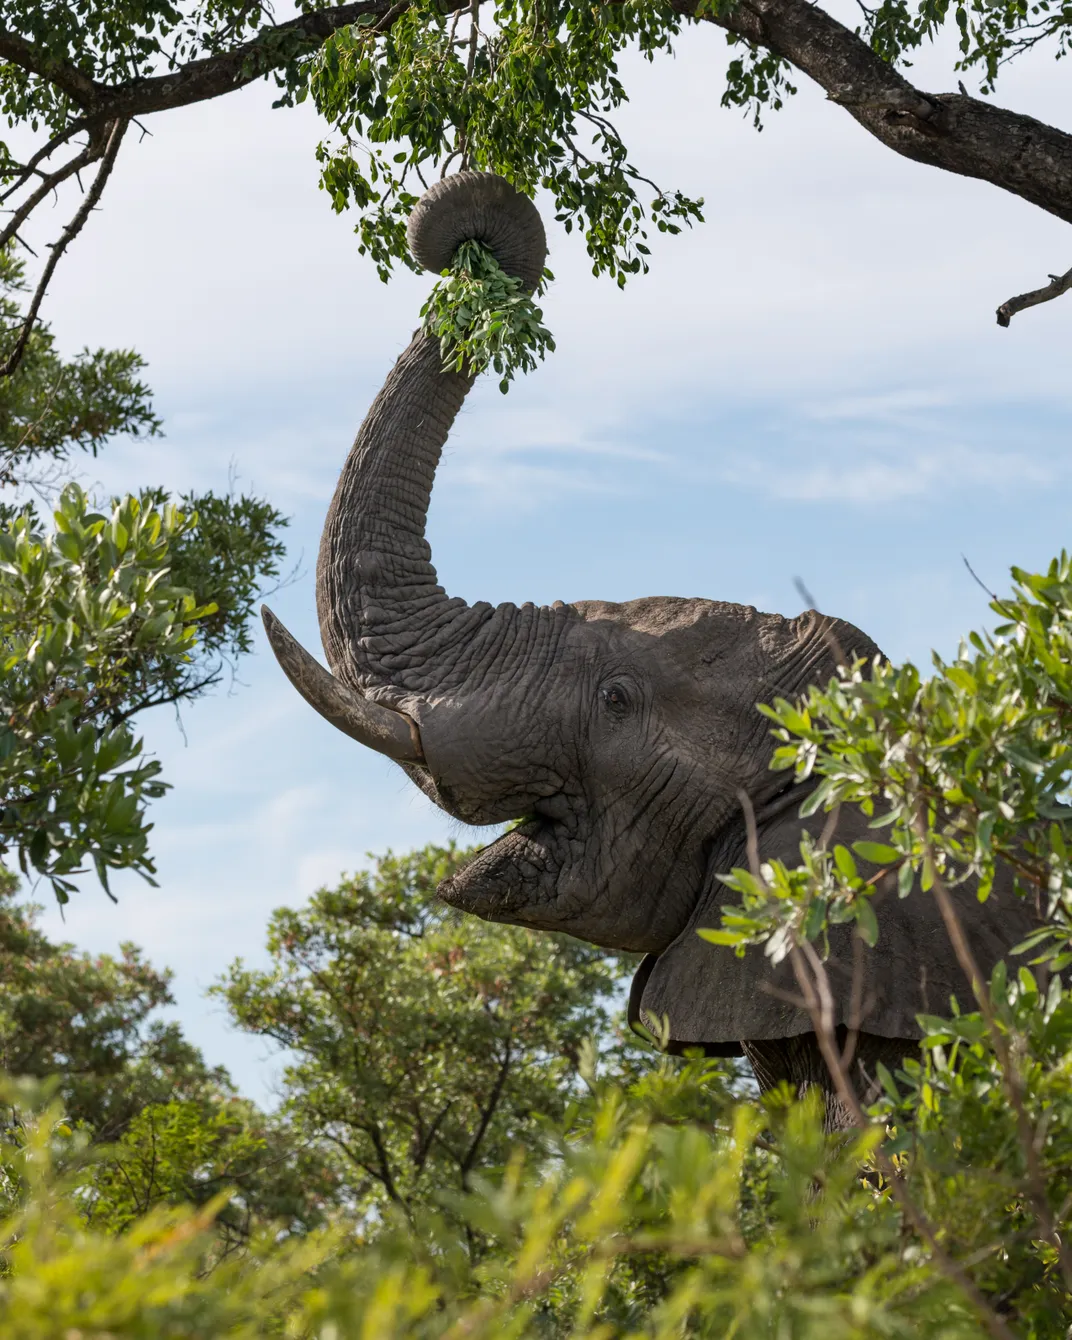 15 - An African elephant almost seems to smile as it enjoys marula fruit for breakfast.